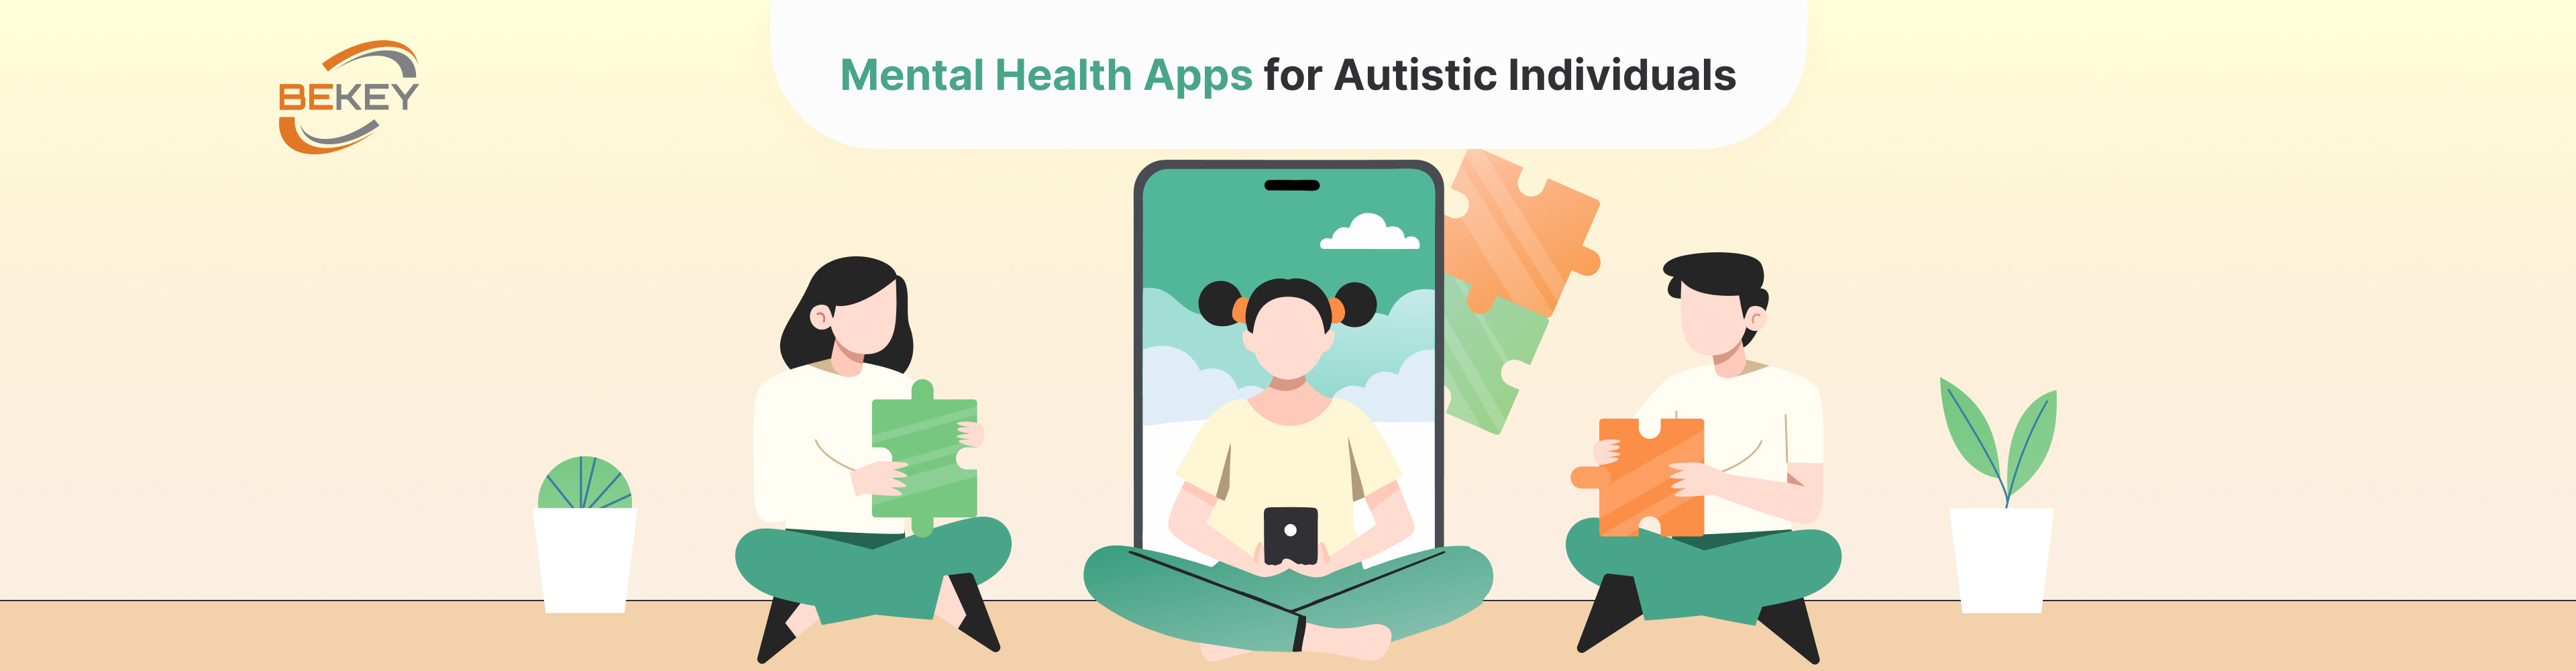 Mental Health Apps for Autistic Individuals - image